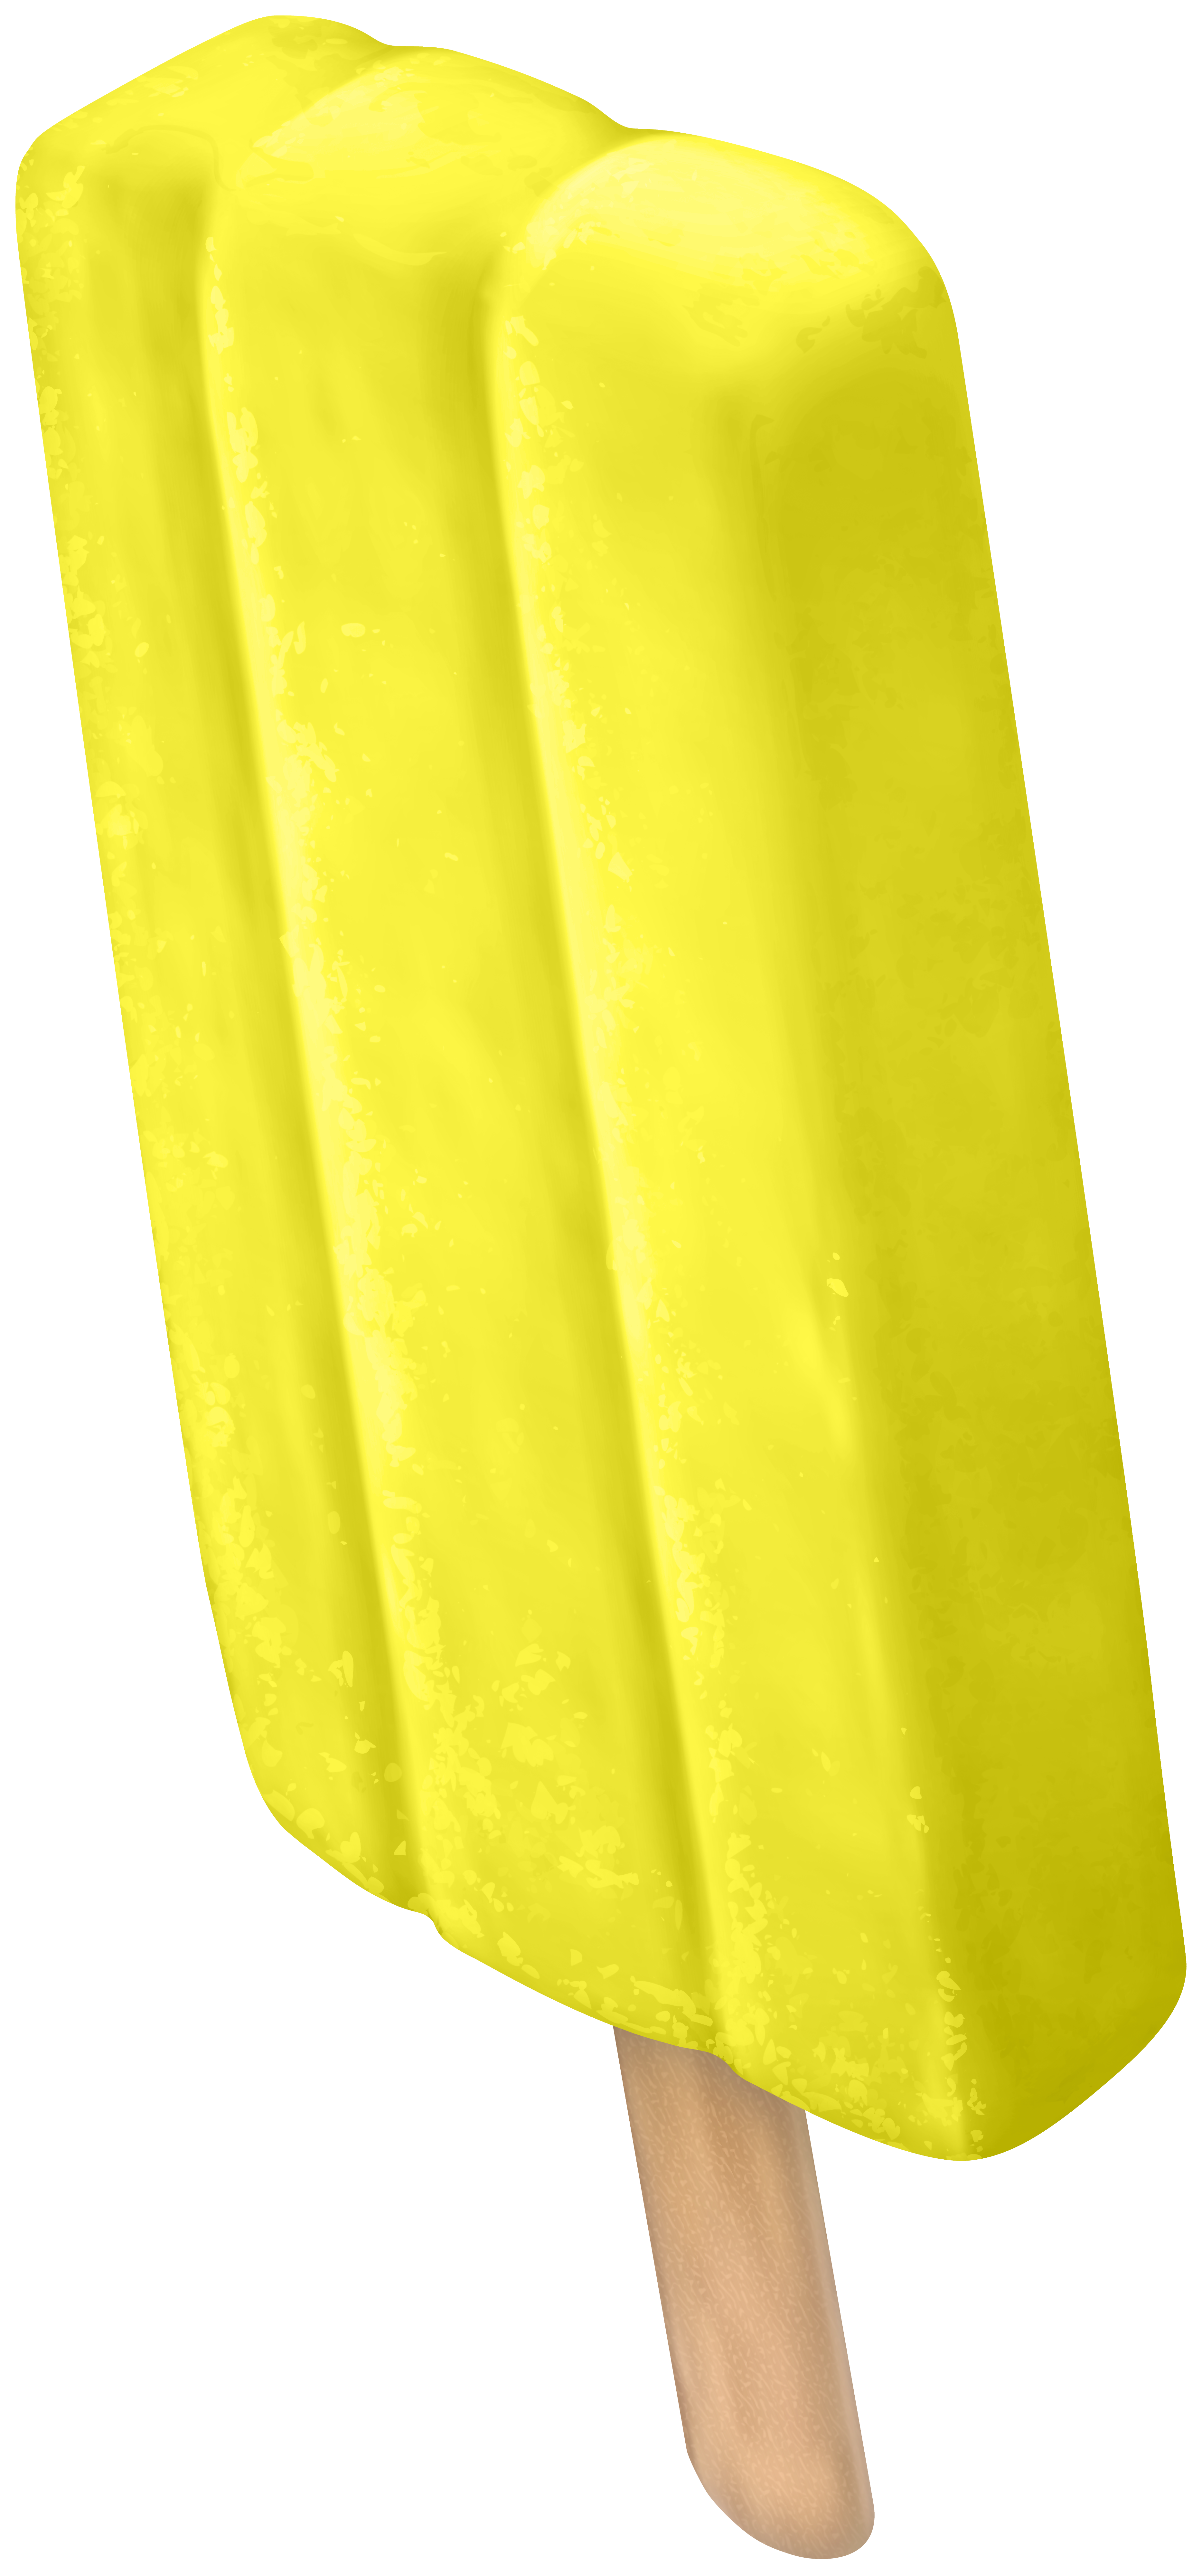 Yellow Popsicle Ice Cream PNG Clipart | Gallery Yopriceville - High